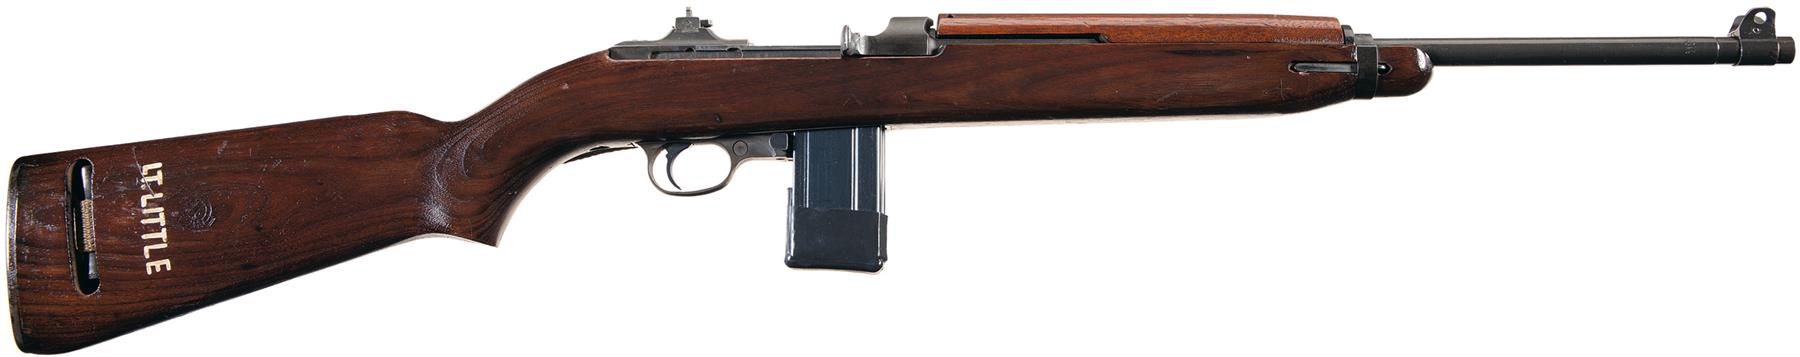 Inland M1 Carbine Serial Numbers Dates